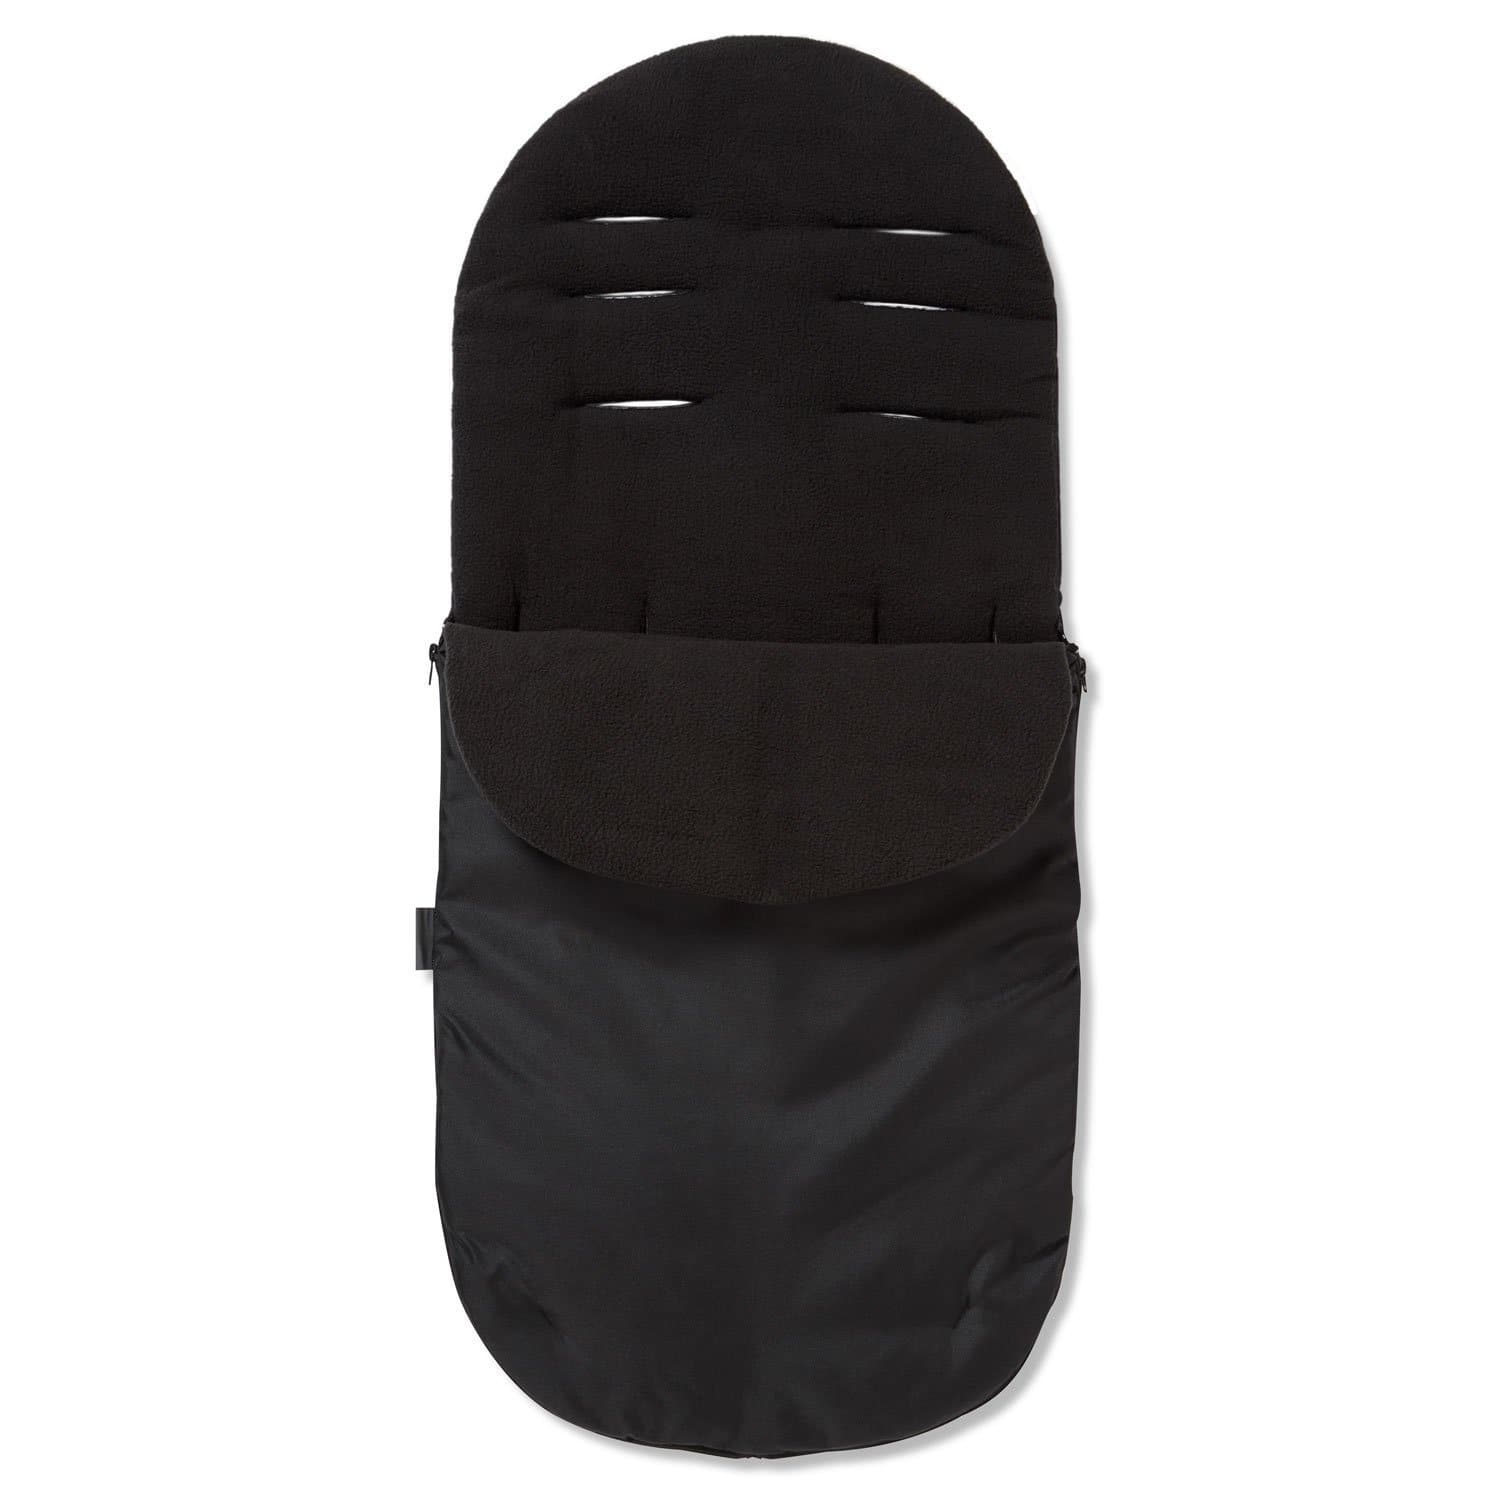 Footmuff / Cosy Toes Compatible with Britax - Black / Fits All Models | For Your Little One